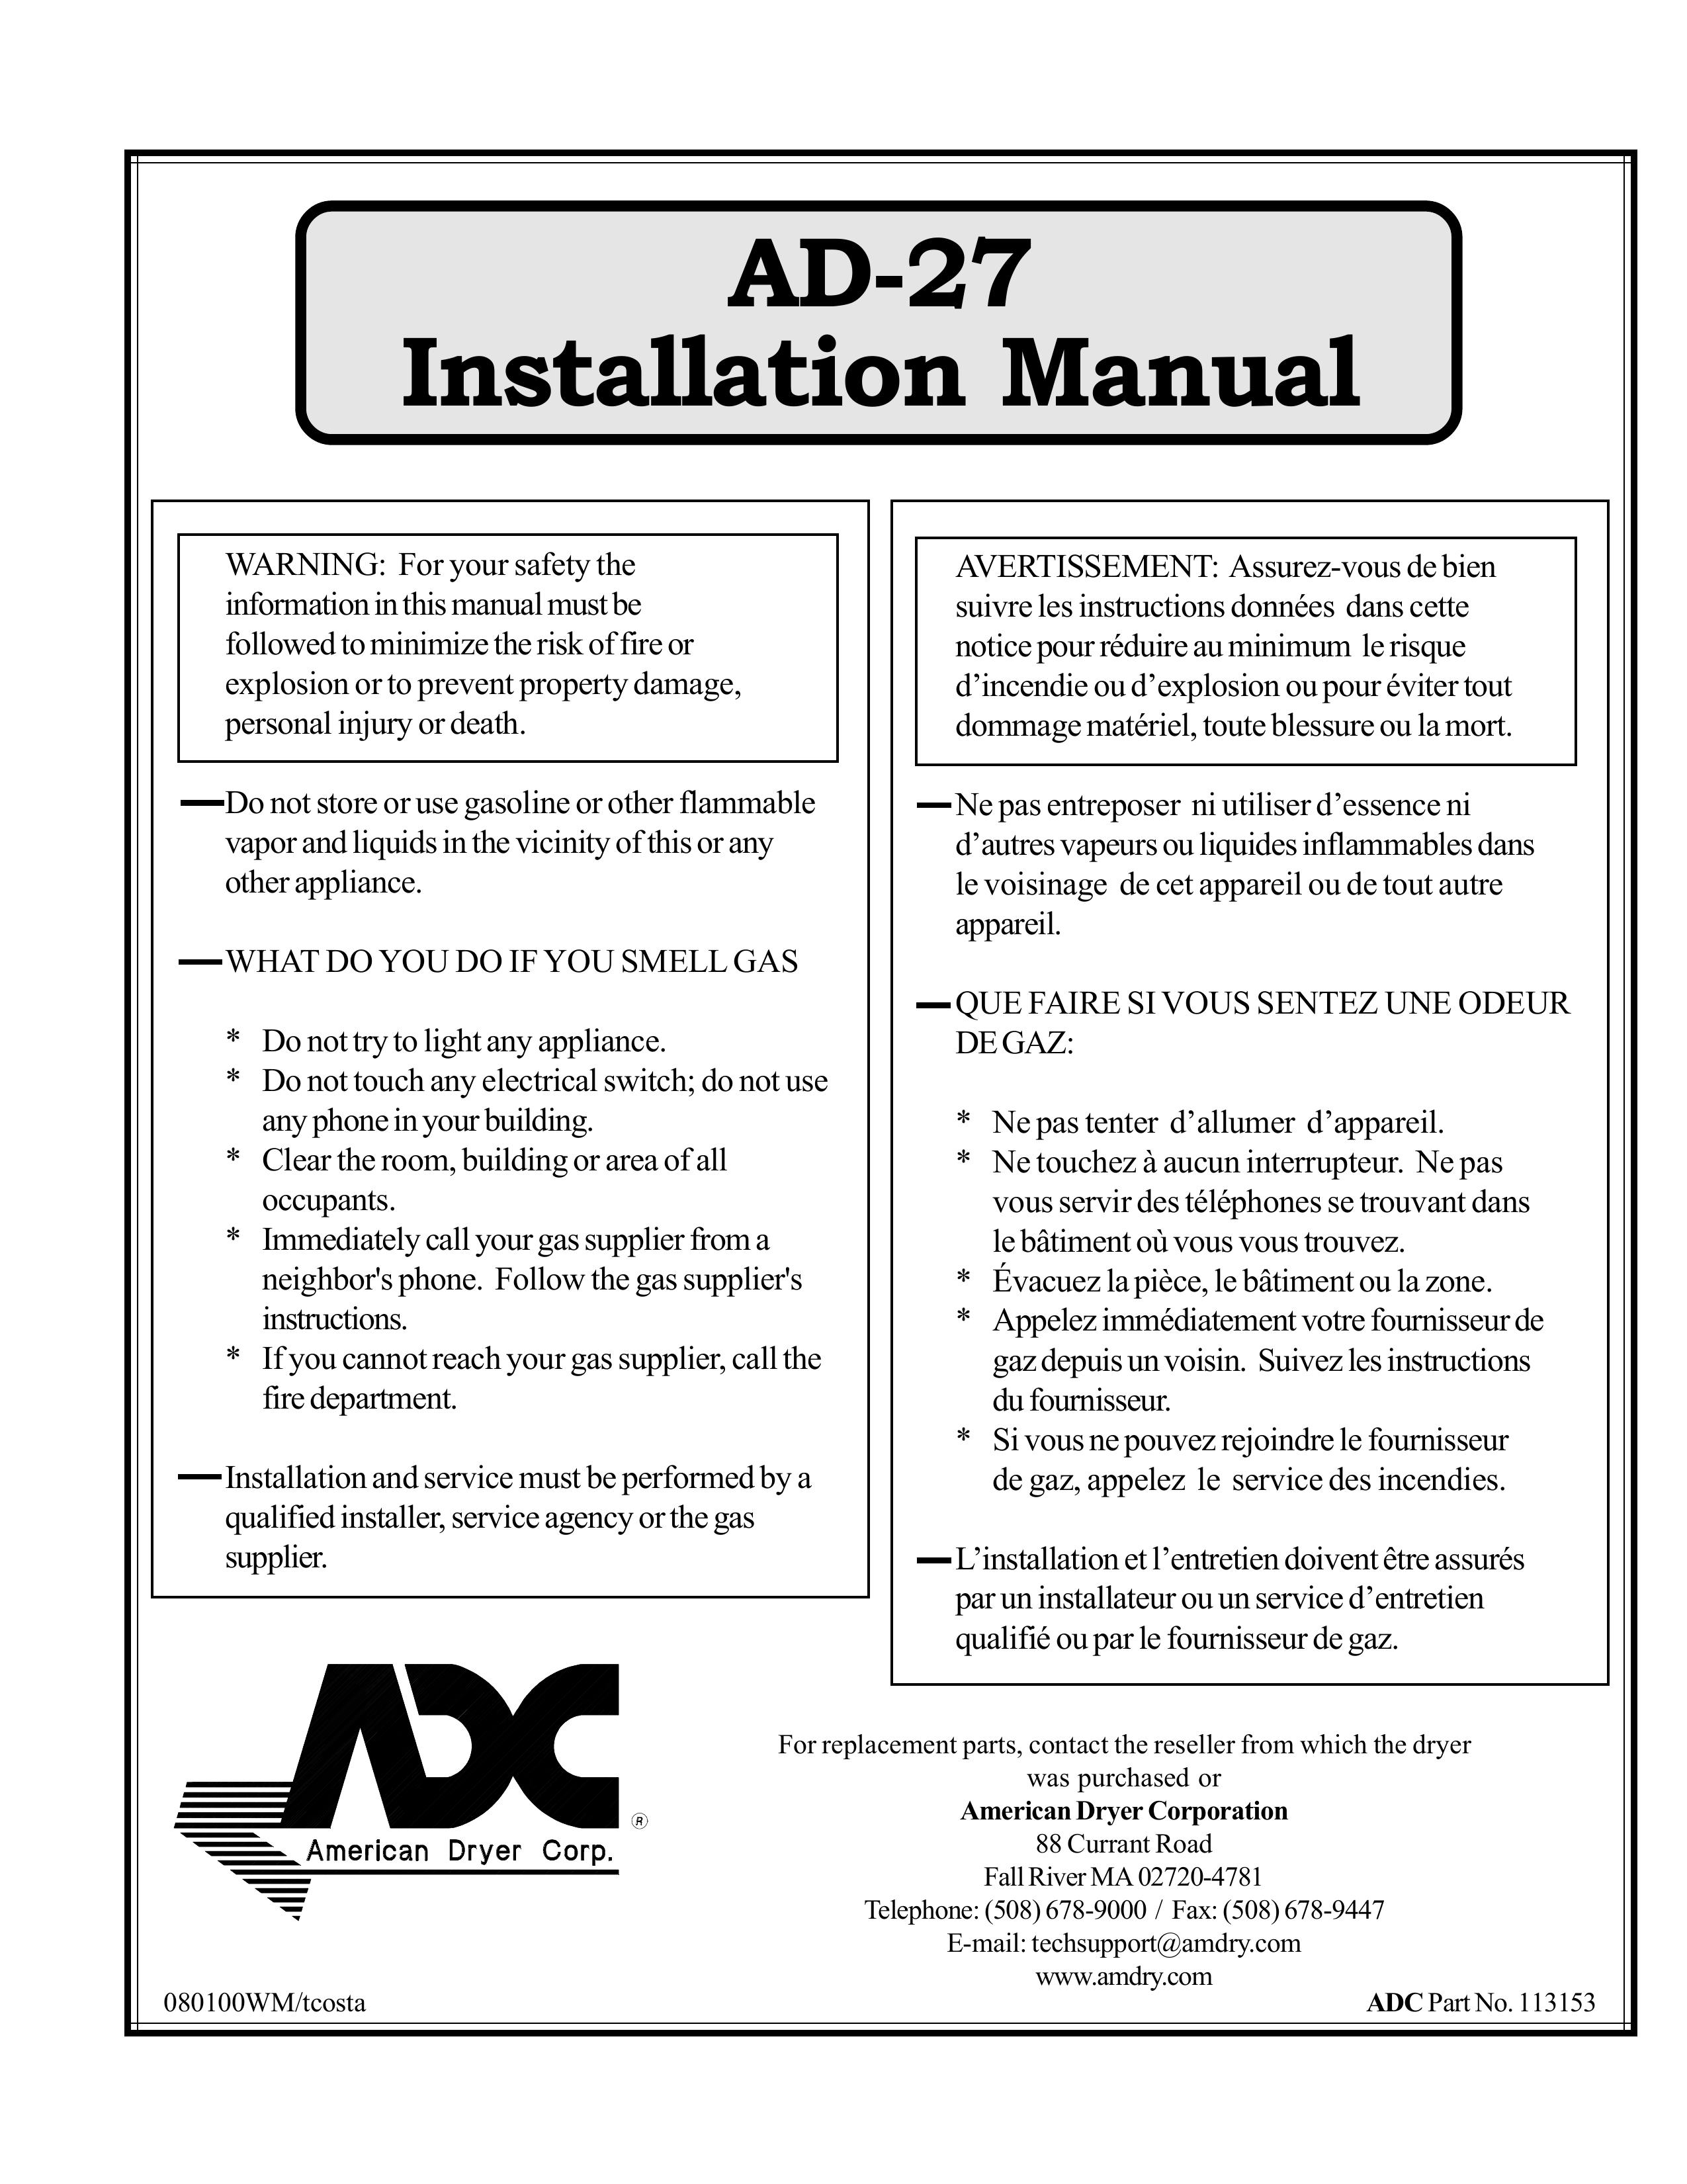 American Dryer Corp. AD-27 Clothes Dryer User Manual